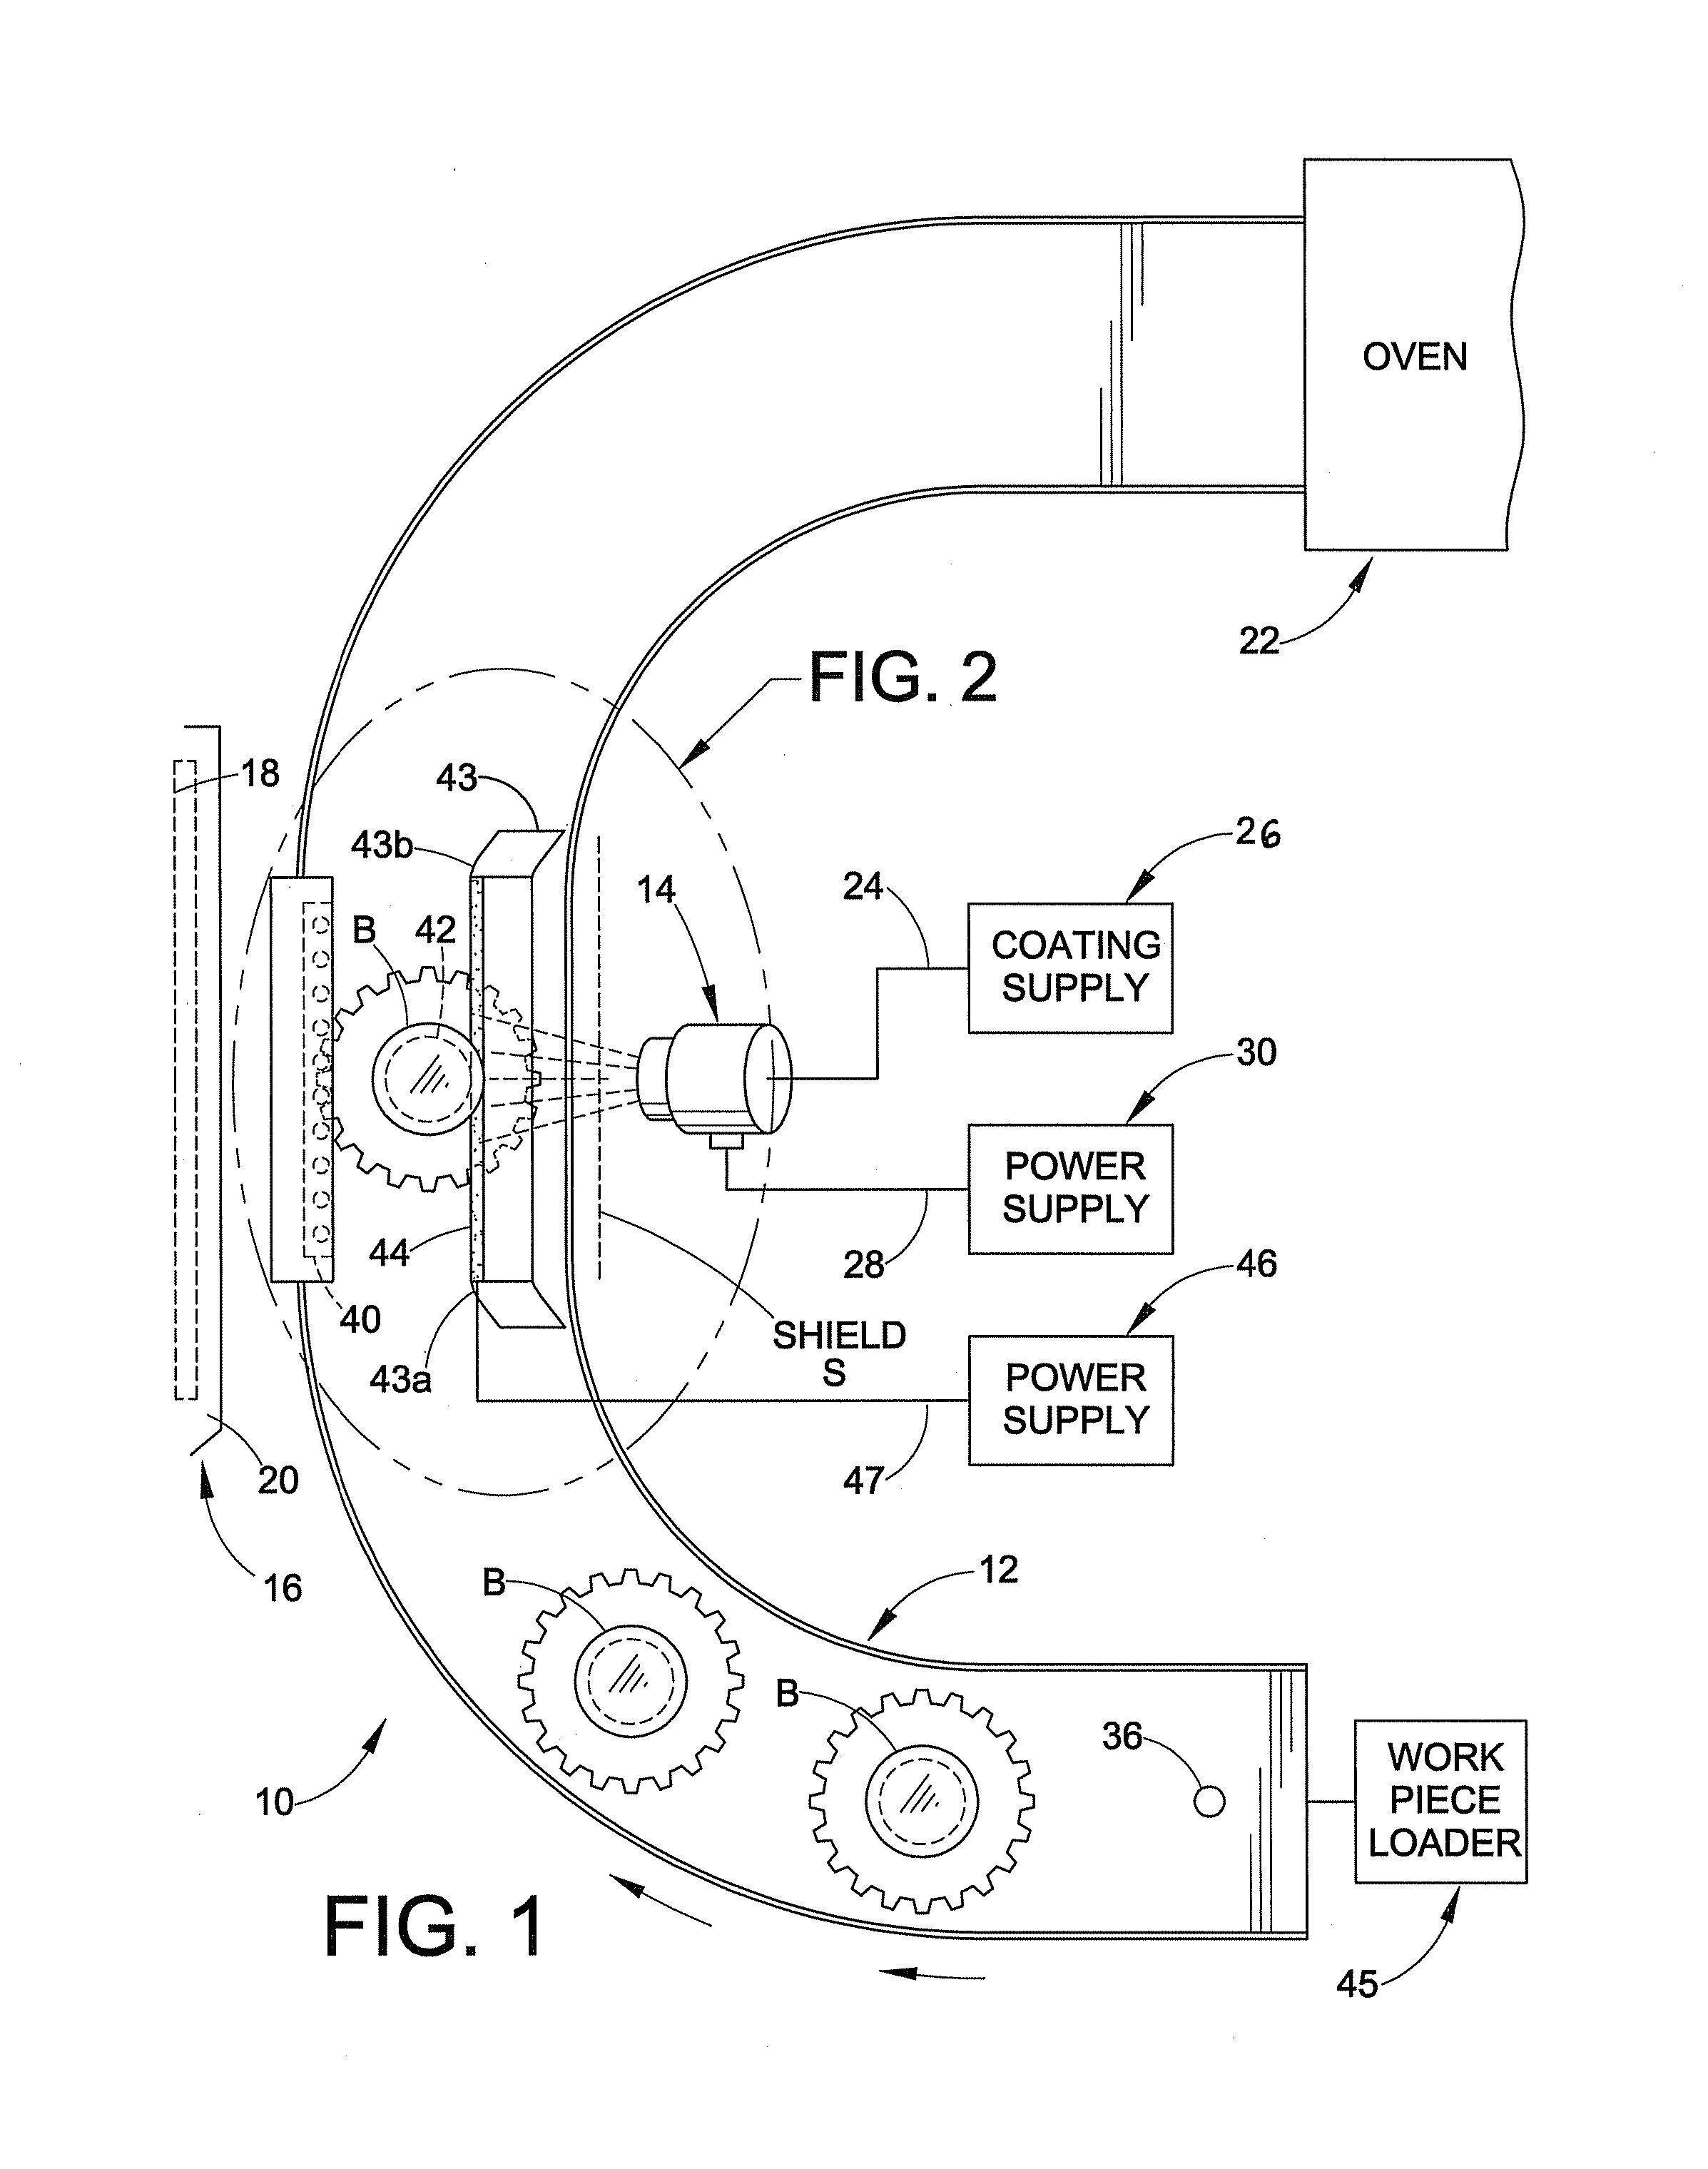 Low capacitance container coating system and method